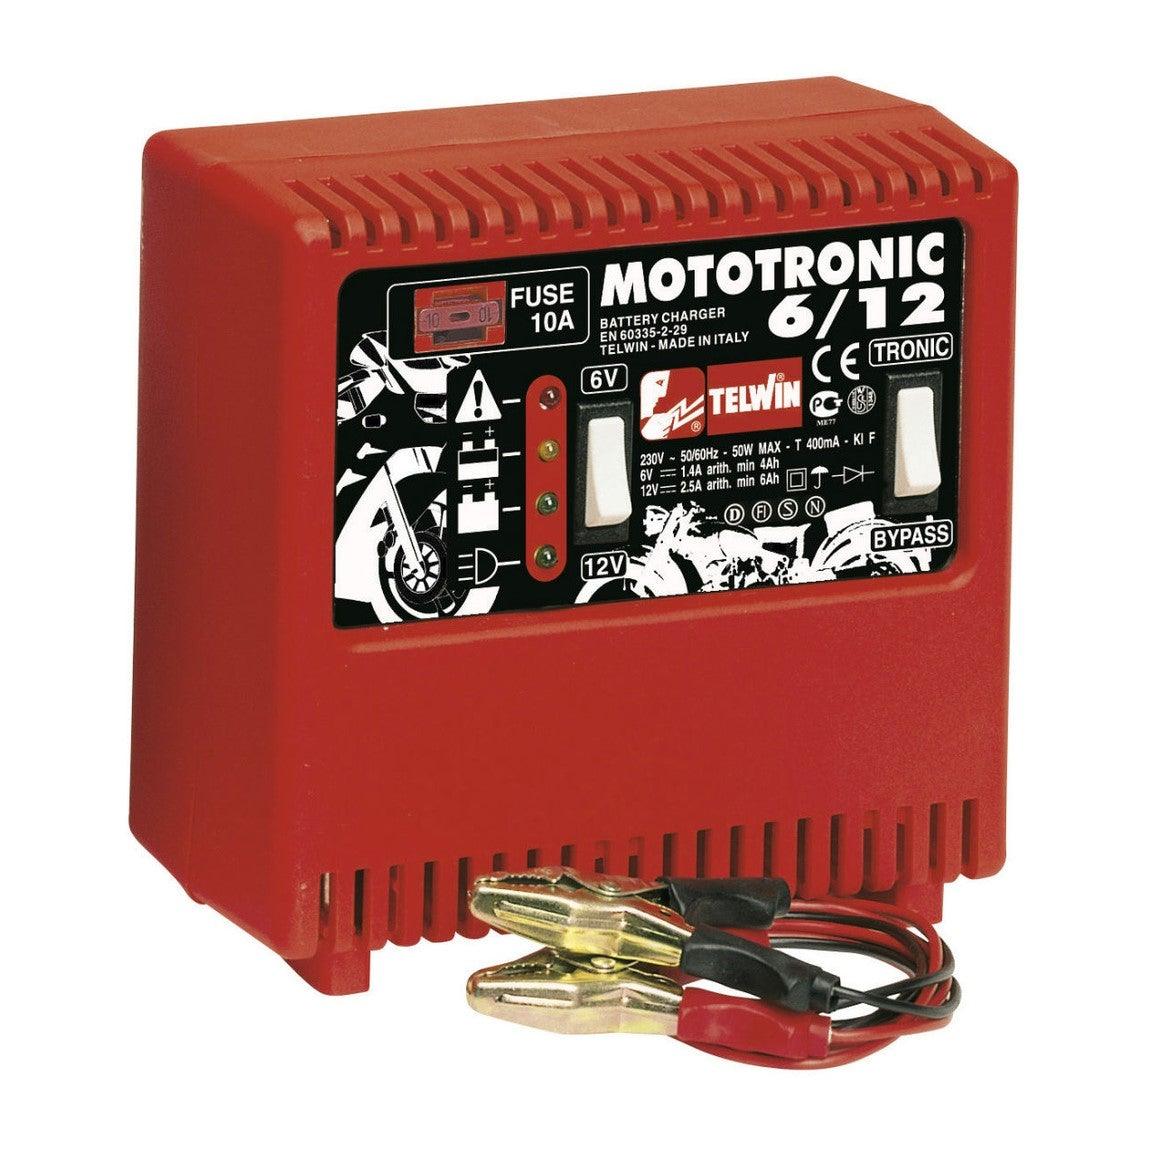 Mototronic 6-12: Takla — Battery Charger Trading